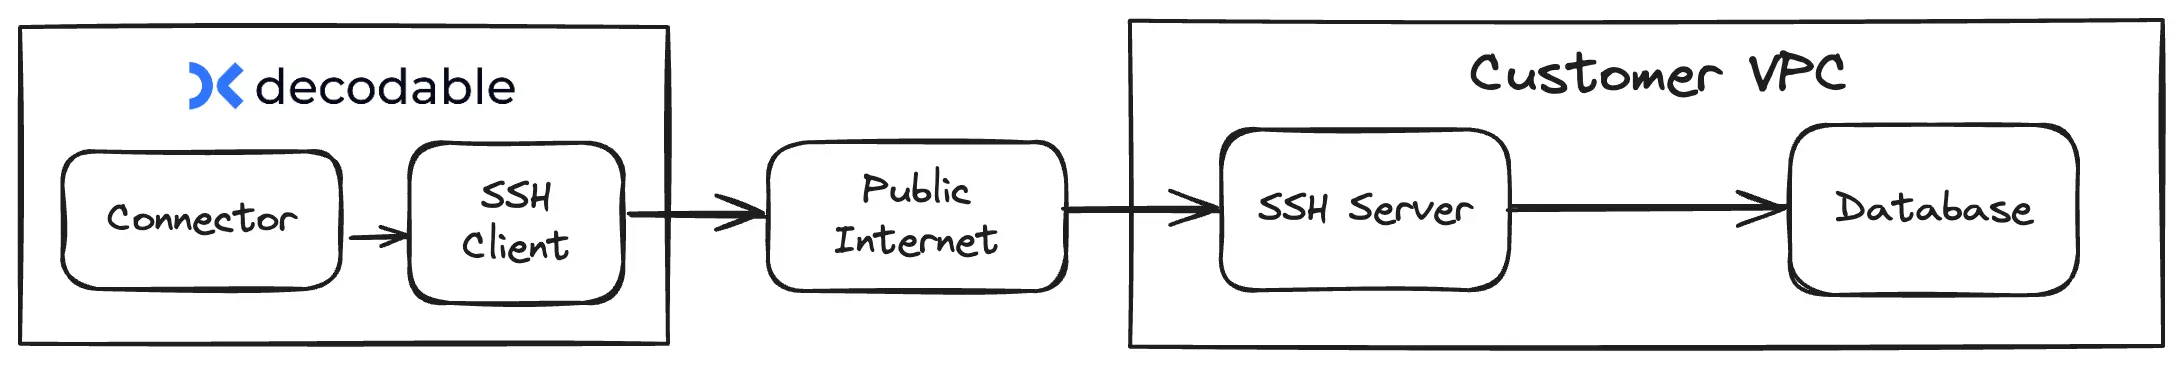 Decodable connects to a customer service via an SSH client on the Decodable side and an SSH service in the customer network